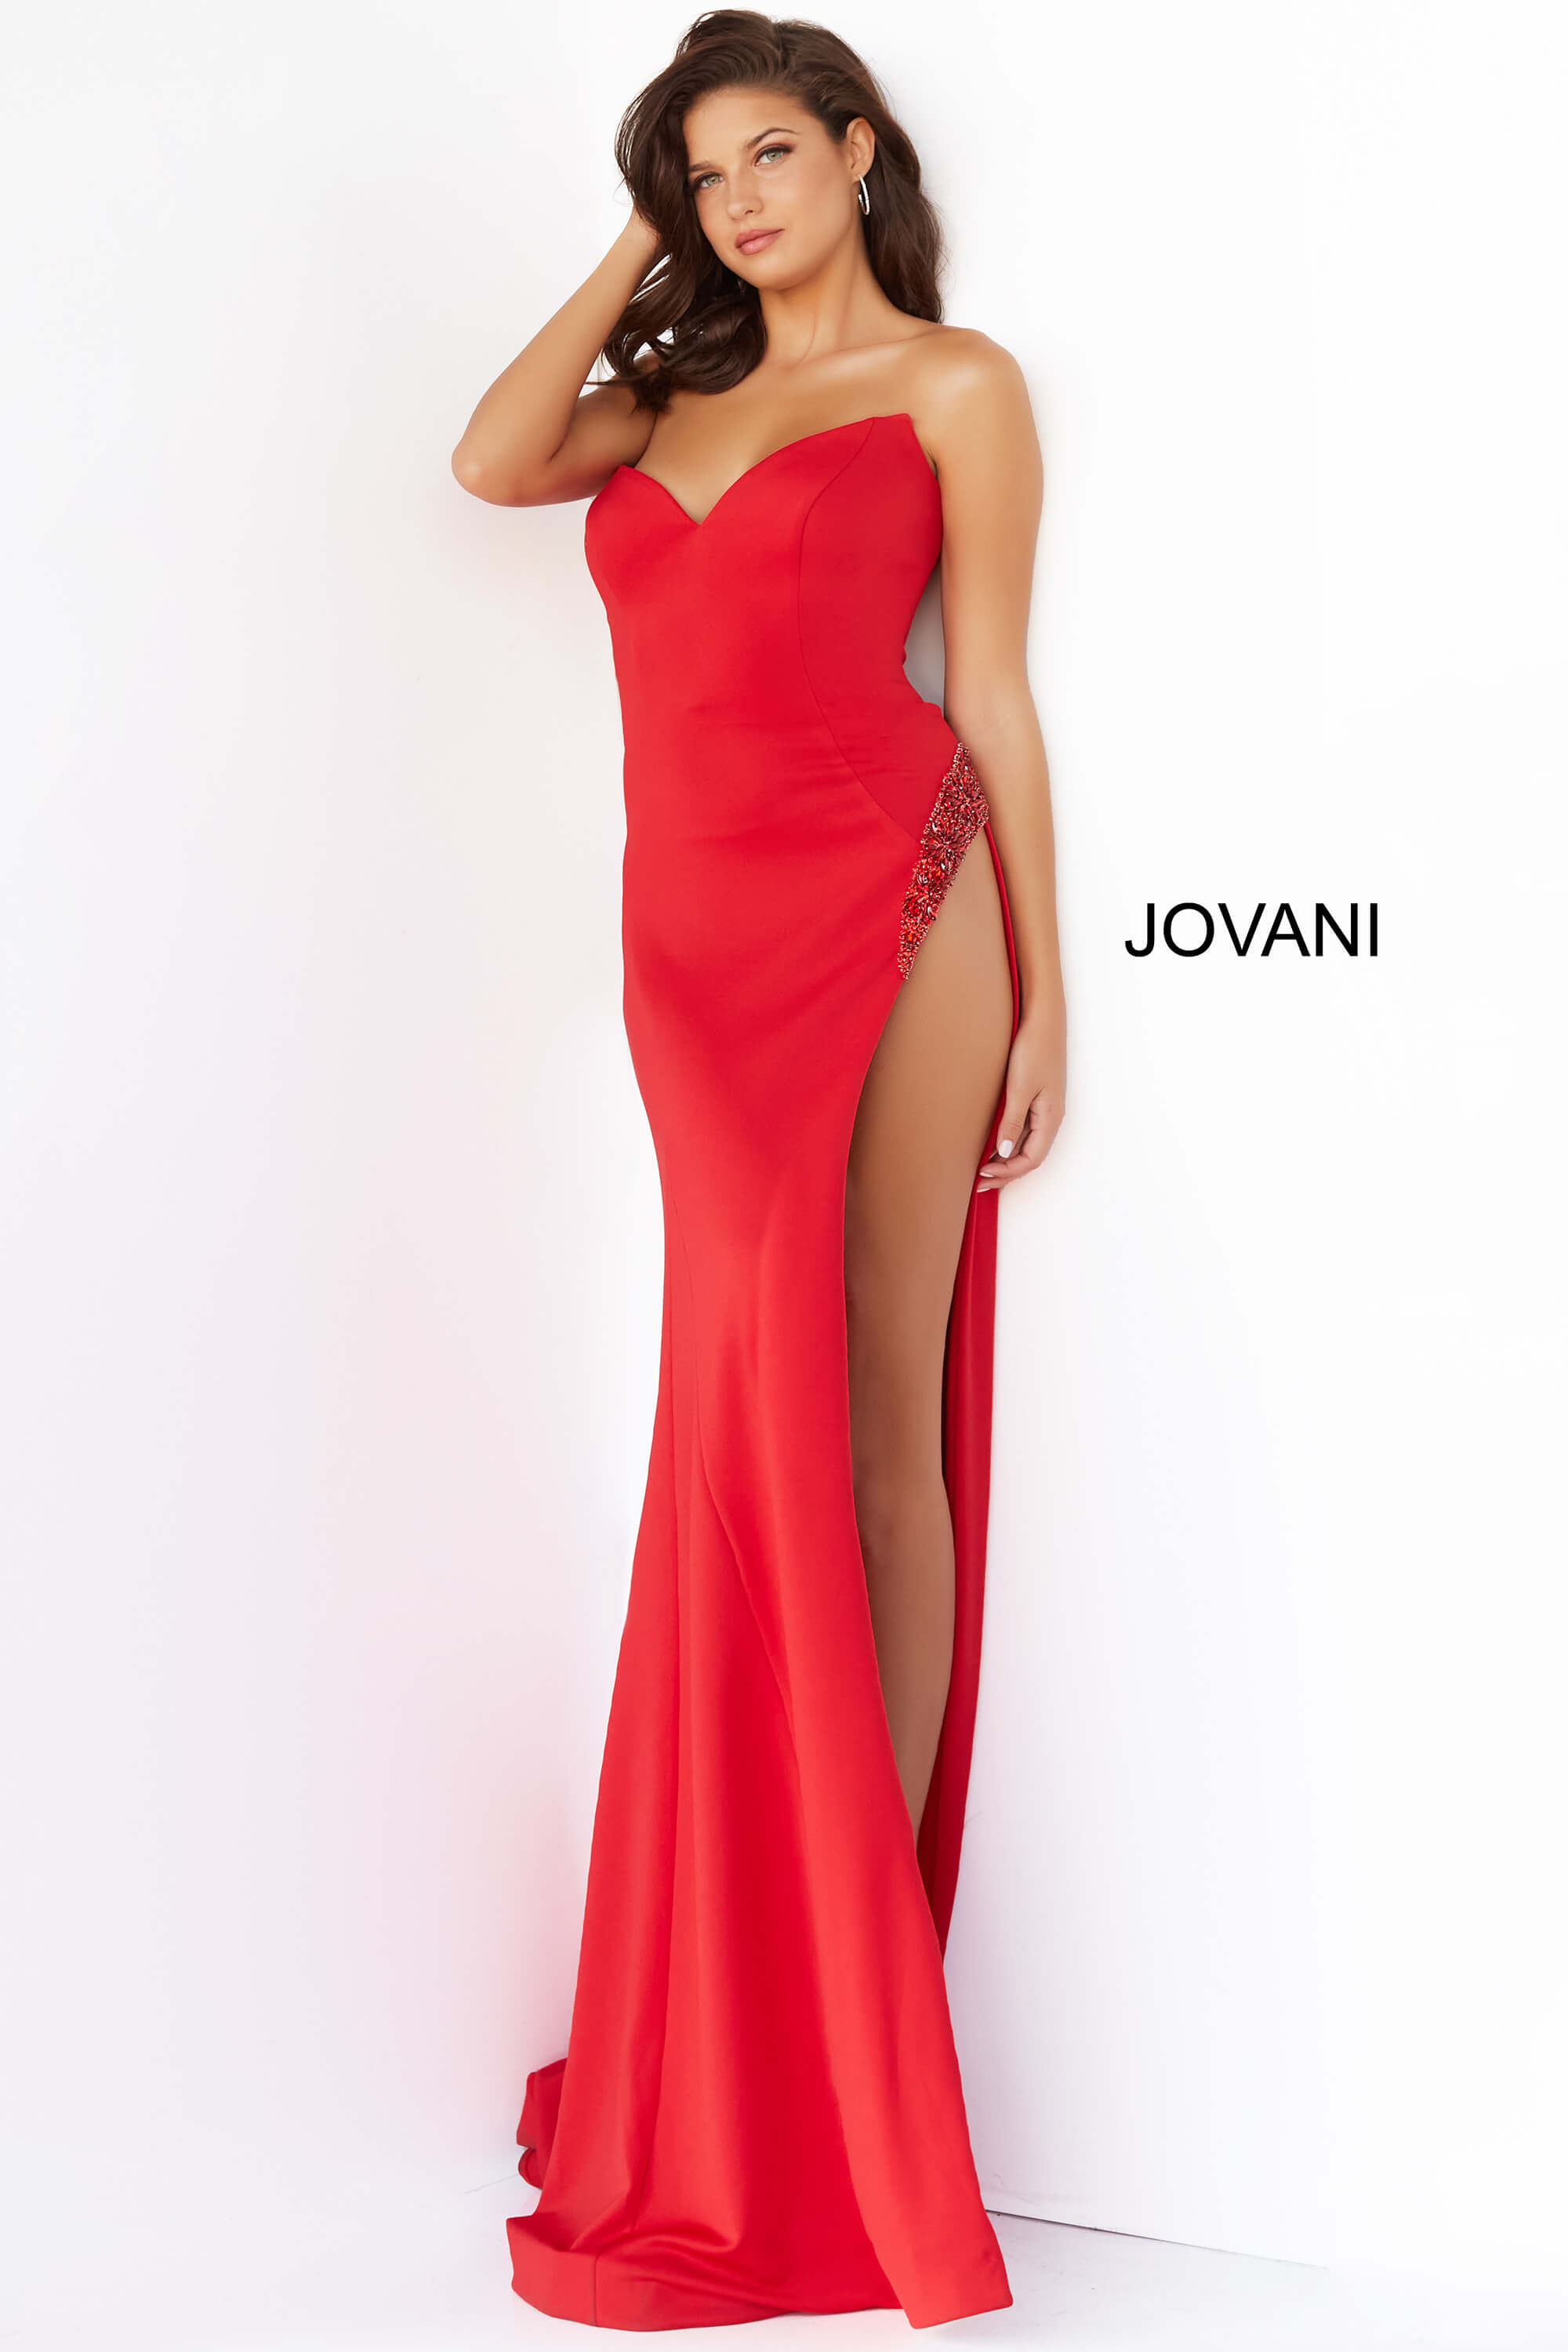 High Slit Couture Prom Dress By Jovani -07138